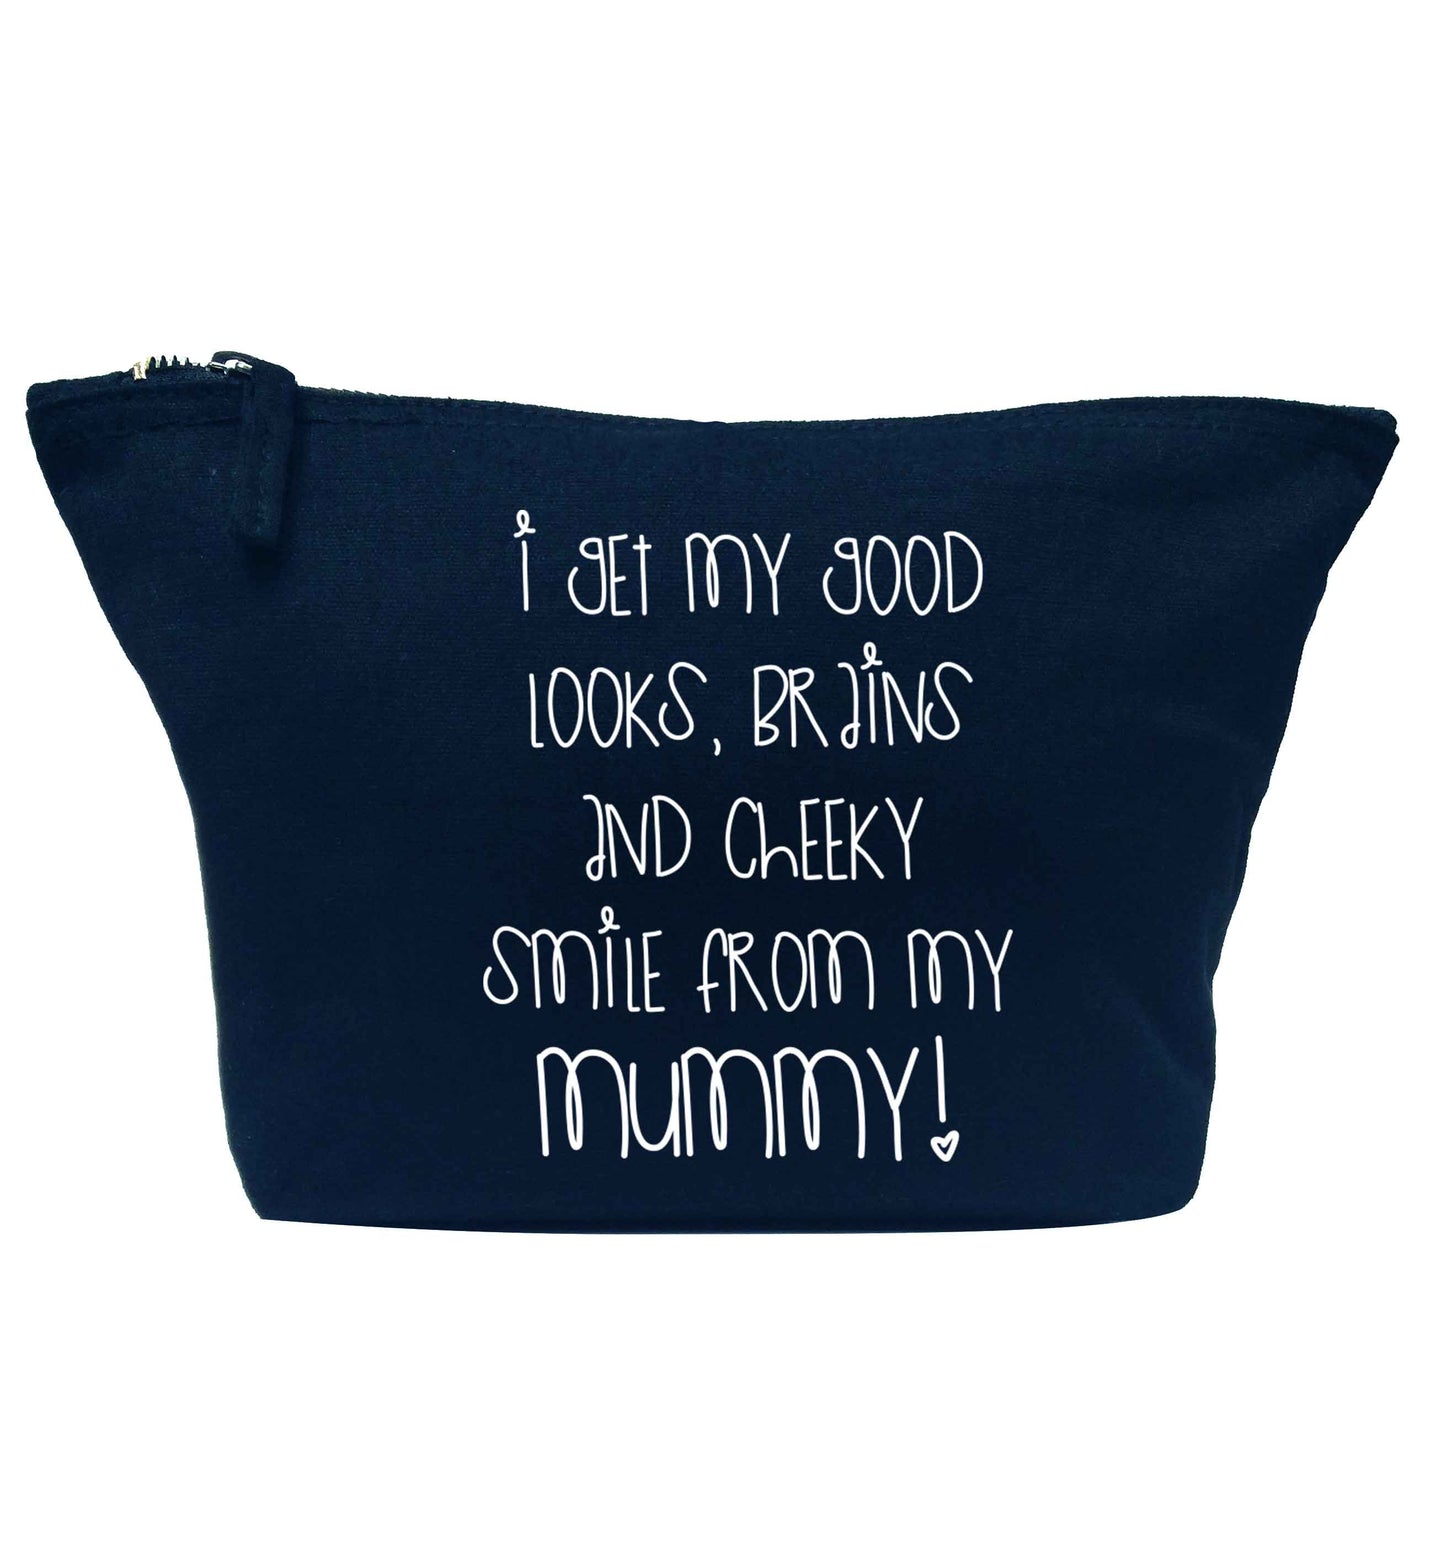 I get my good looks, brains and cheeky smile from my mummy navy makeup bag